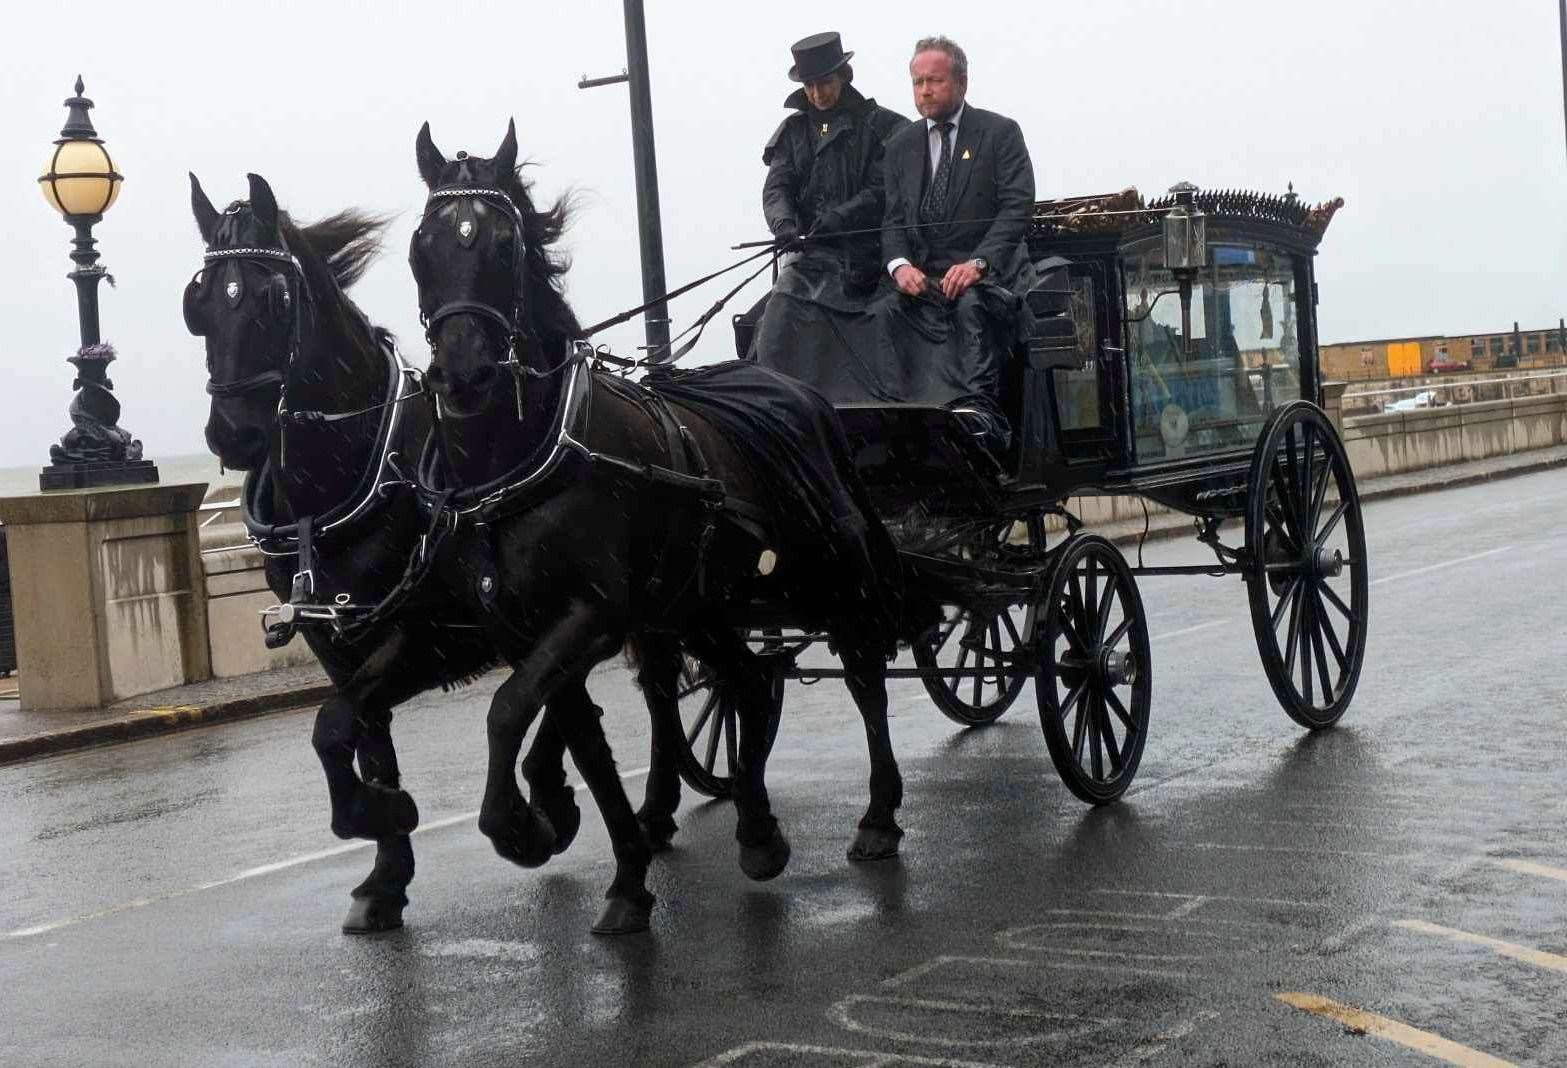 Maurice Morris, who worked at Dreamland for many years, took his final journey through Margate today before his funeral. Picture: Isabelle de Ridder